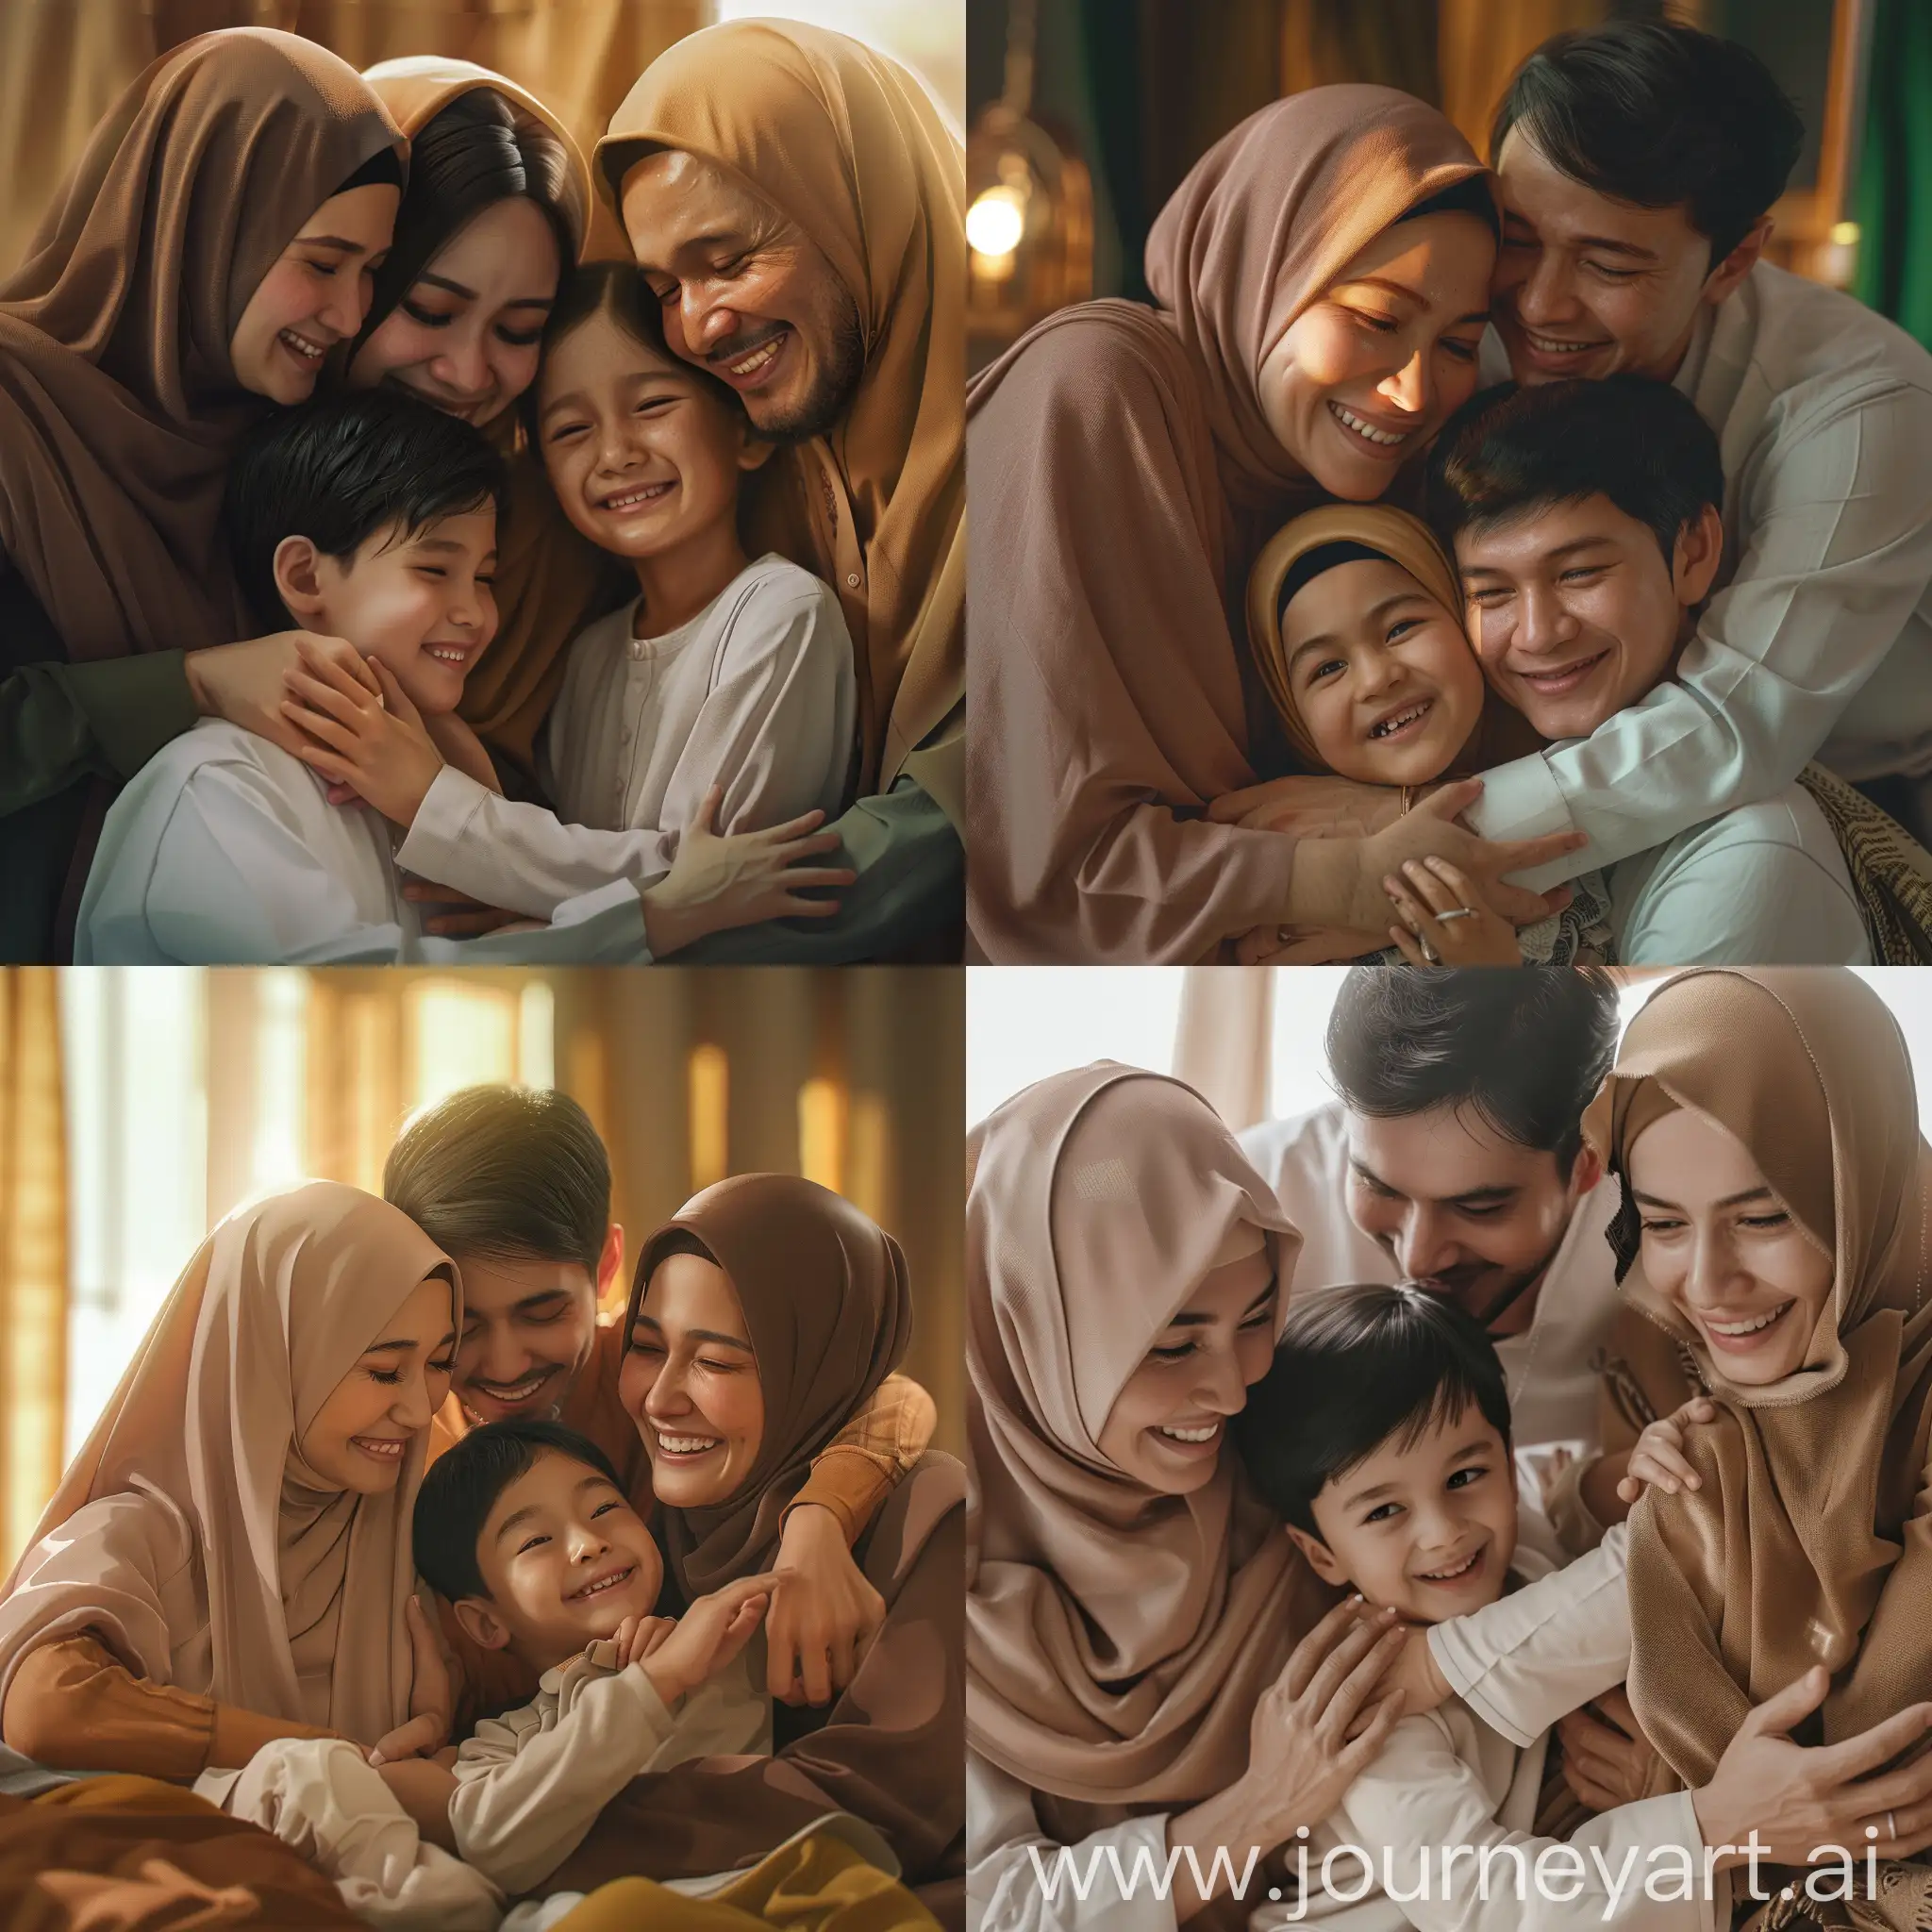 a happy family, hijab, 1girl, 1boy, 1woman, 1man, warm lighting, natural light, cozy, intimate, smiling, embracing, high quality, detailed, photorealistic, 8k